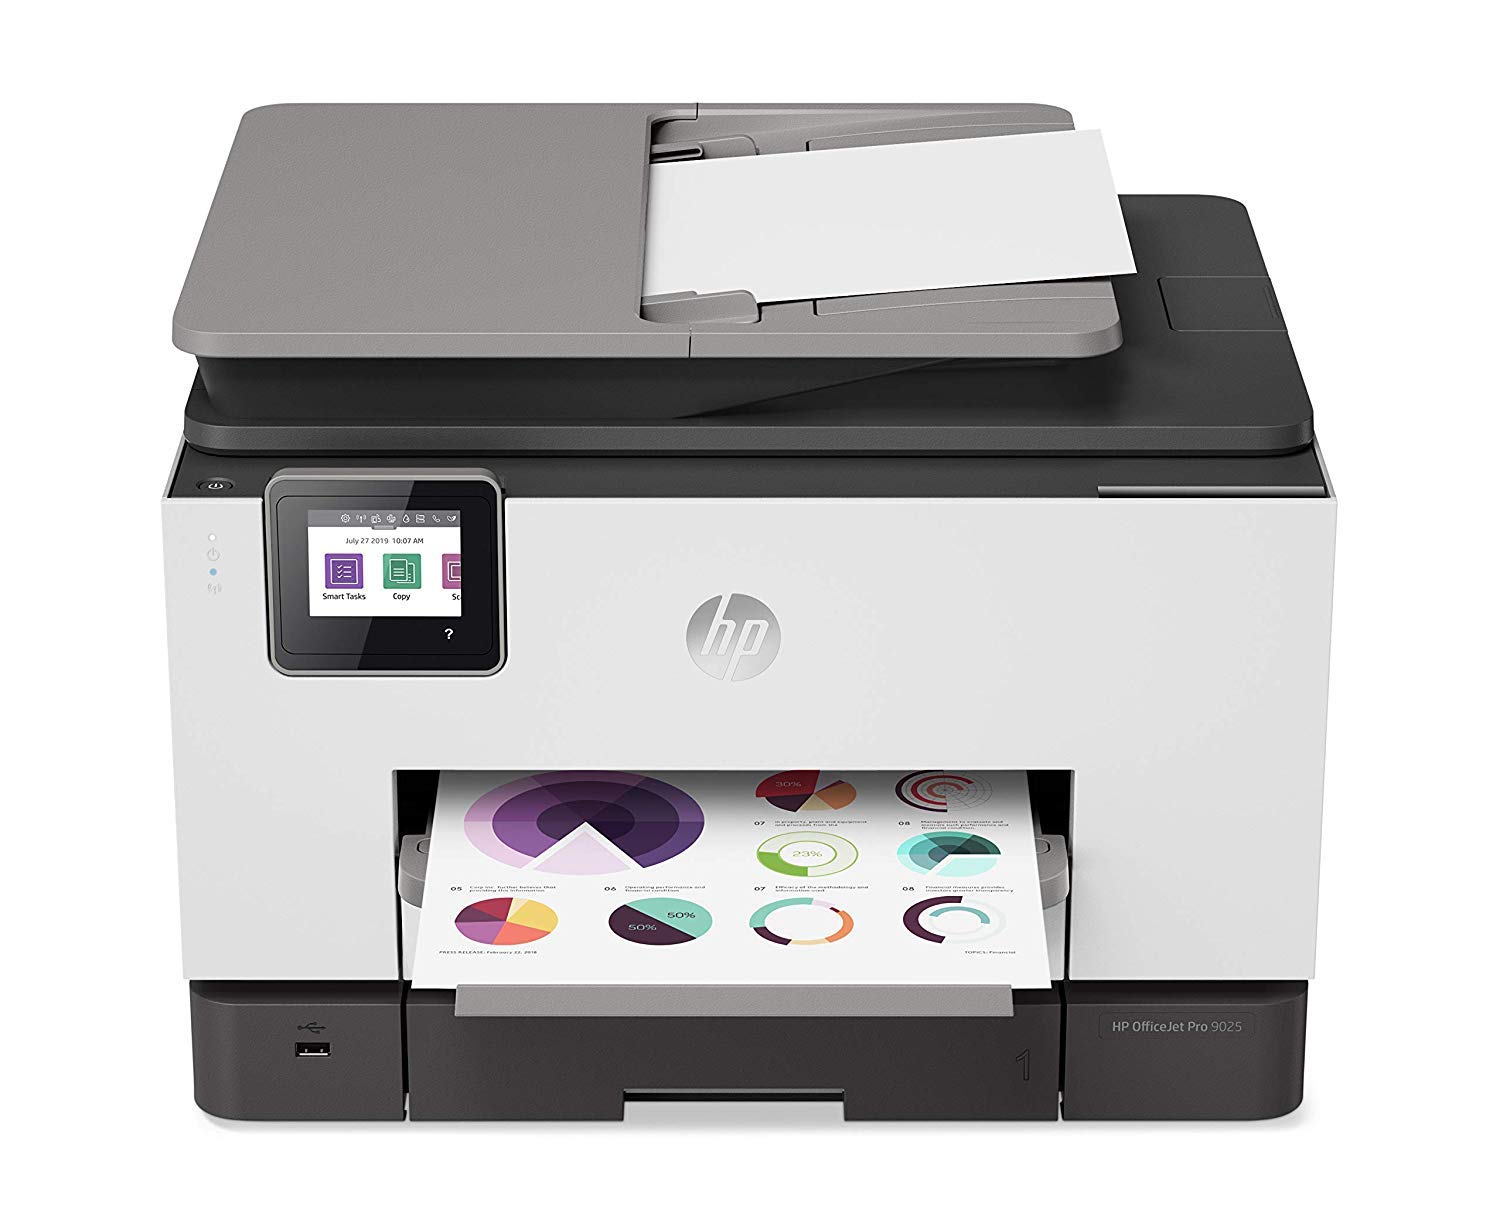 Top 7 HP OfficeJet Printers in 2021 - Reviews and Comparison